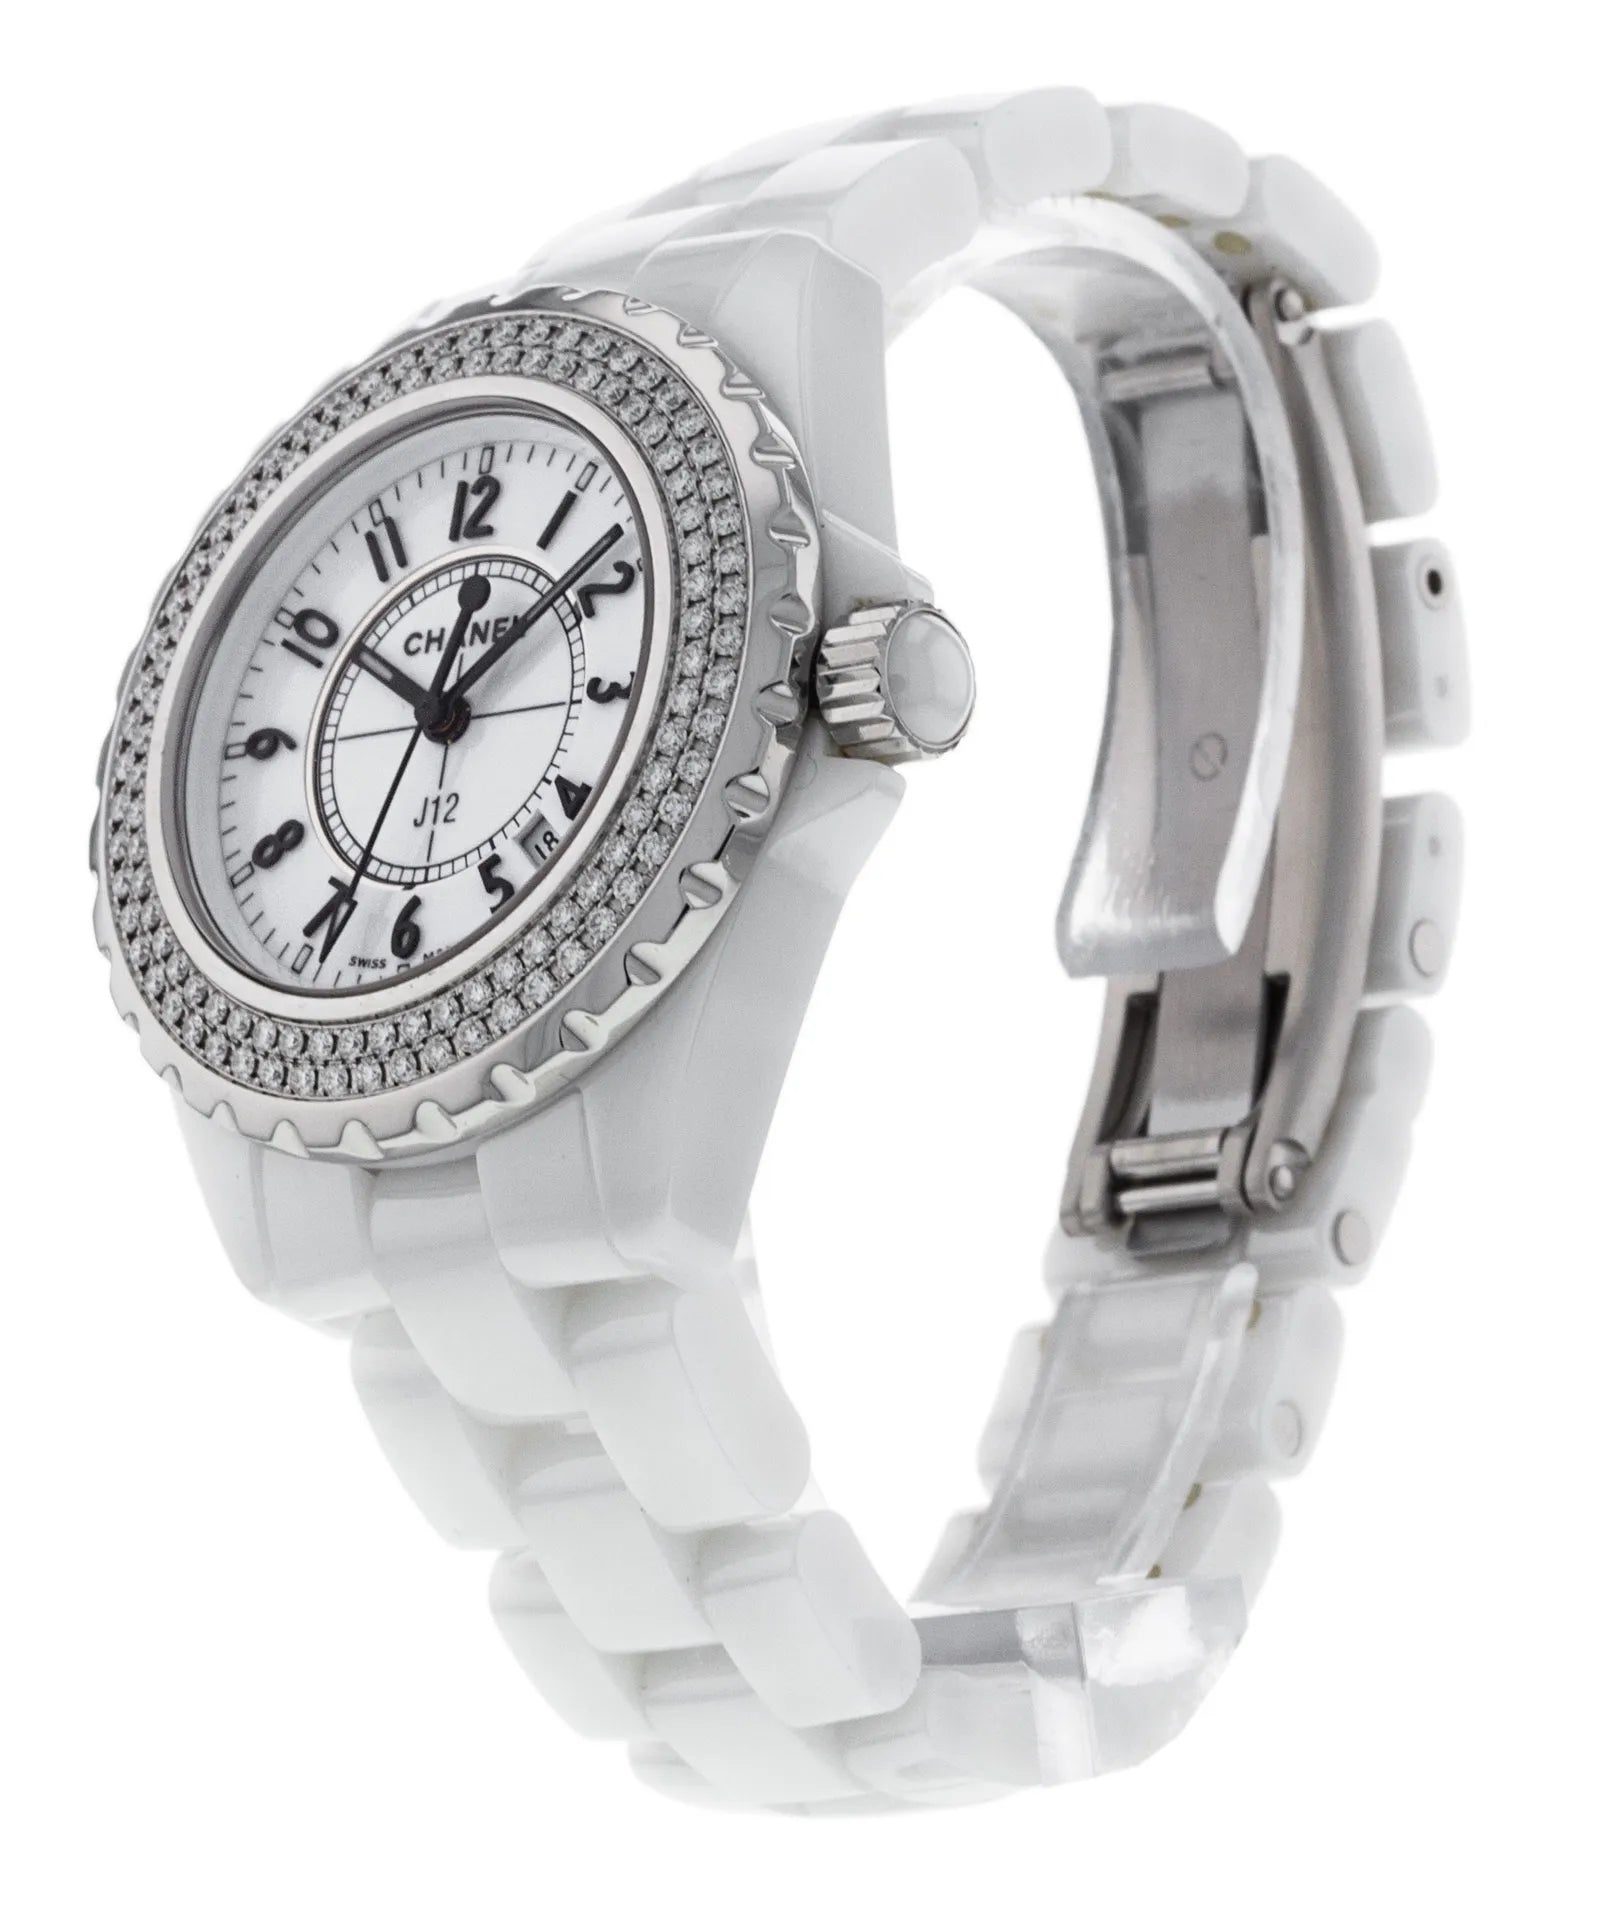 Chanel Watch Ladies J12 Diamond Date Quartz Ceramic Stainless for $3,758  for sale from a Trusted Seller on Chrono24